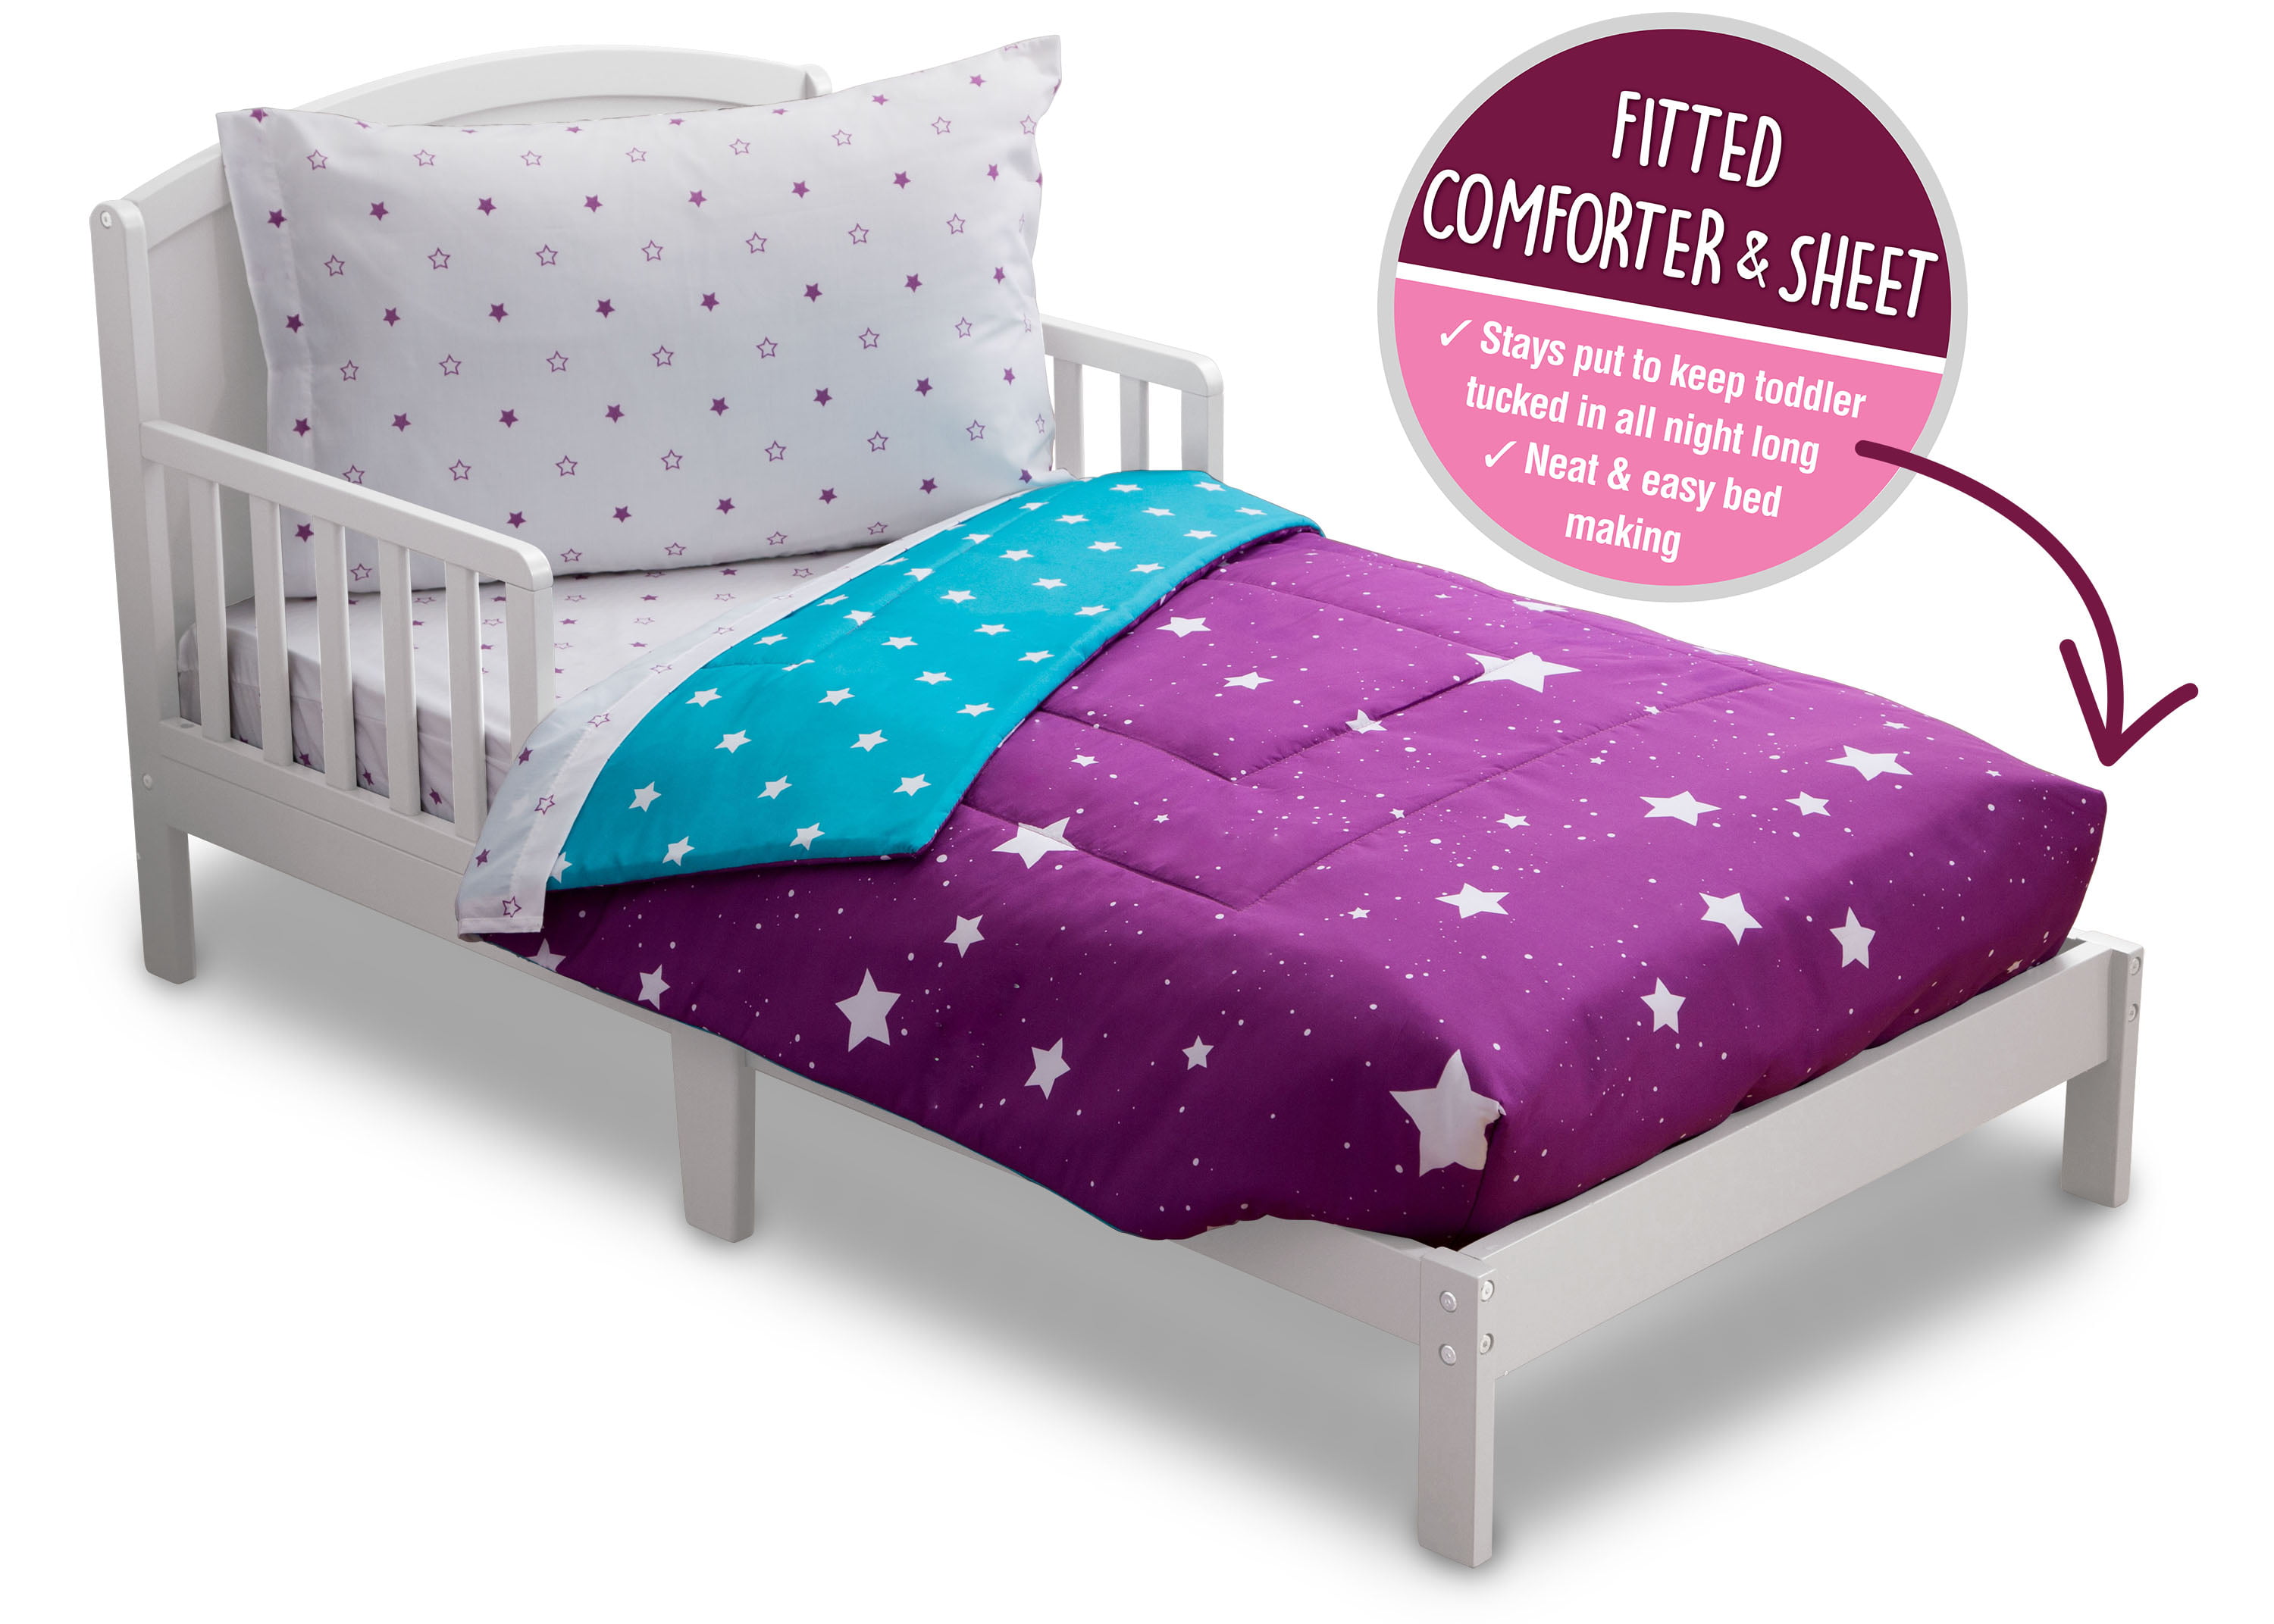 Delta 4 Piece Bedding Sets, Toddler Bed with Comforter, Flat Top Sheet,  Fitted Bottom Sheet, Pillowcase